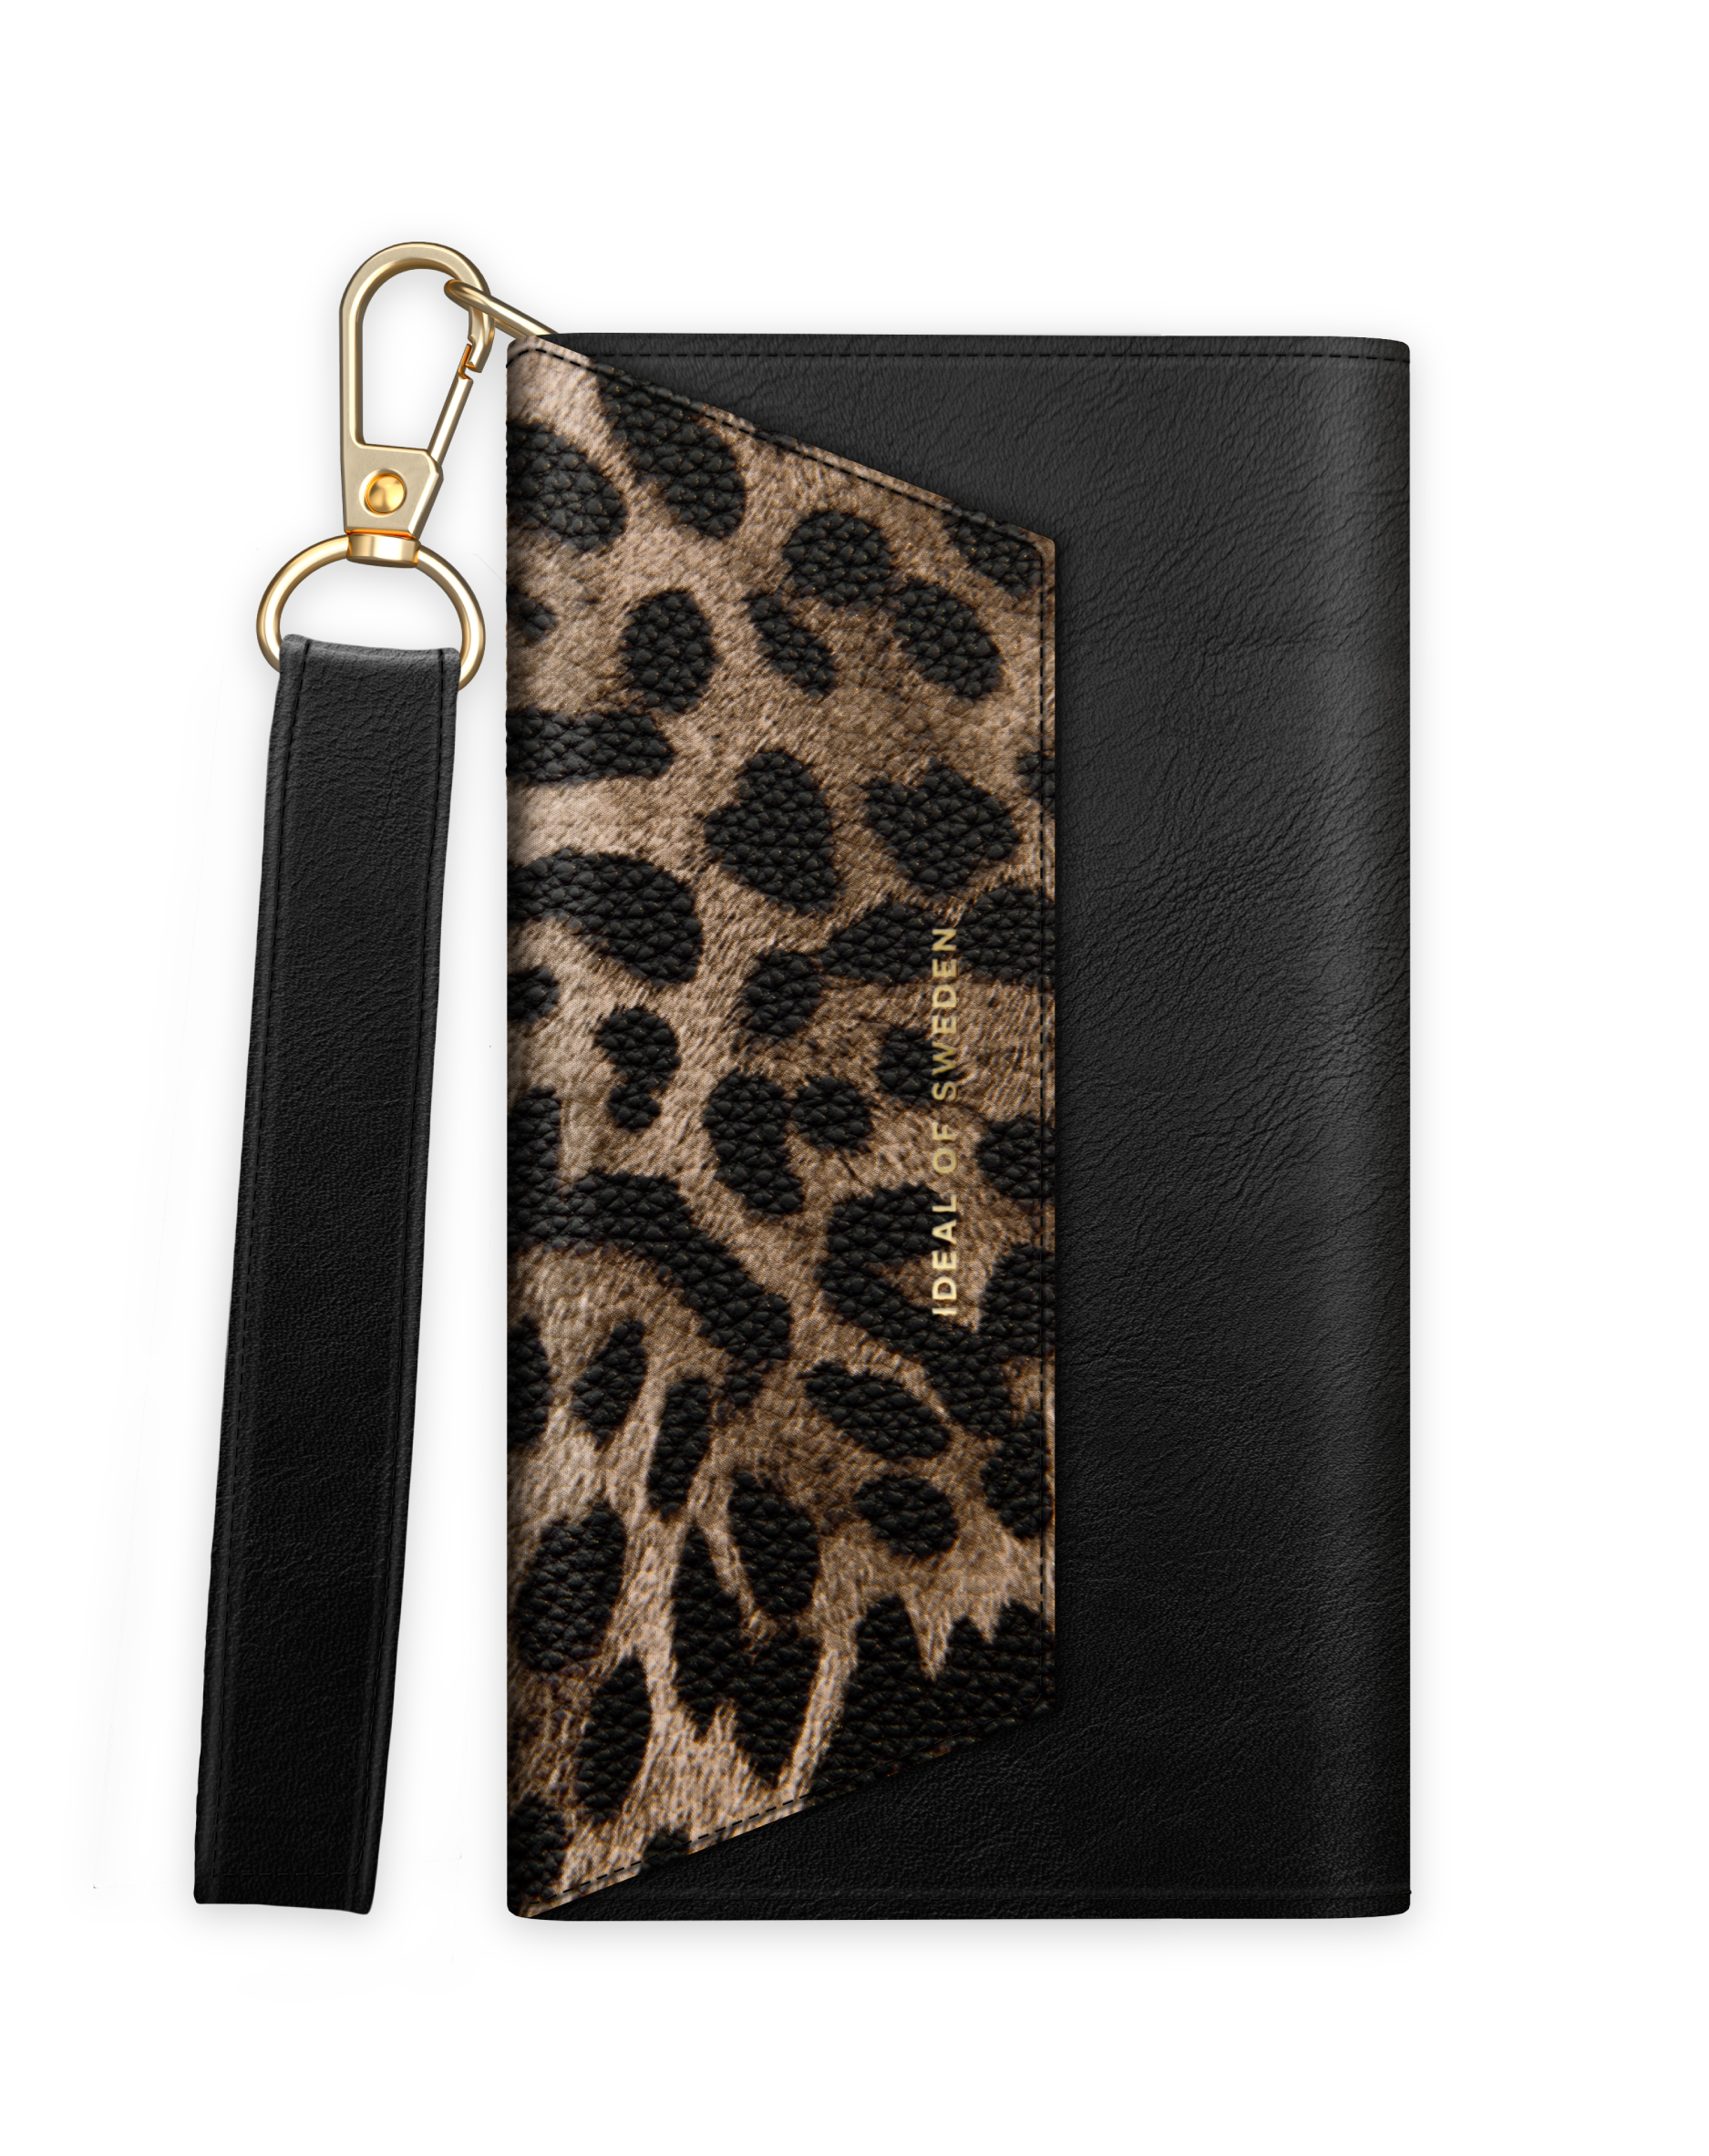 SWEDEN Pro 13 Full Leopard Max, Midnight Cover, IDEAL OF iPhone Apple, IDCCAW21-I2167-330,